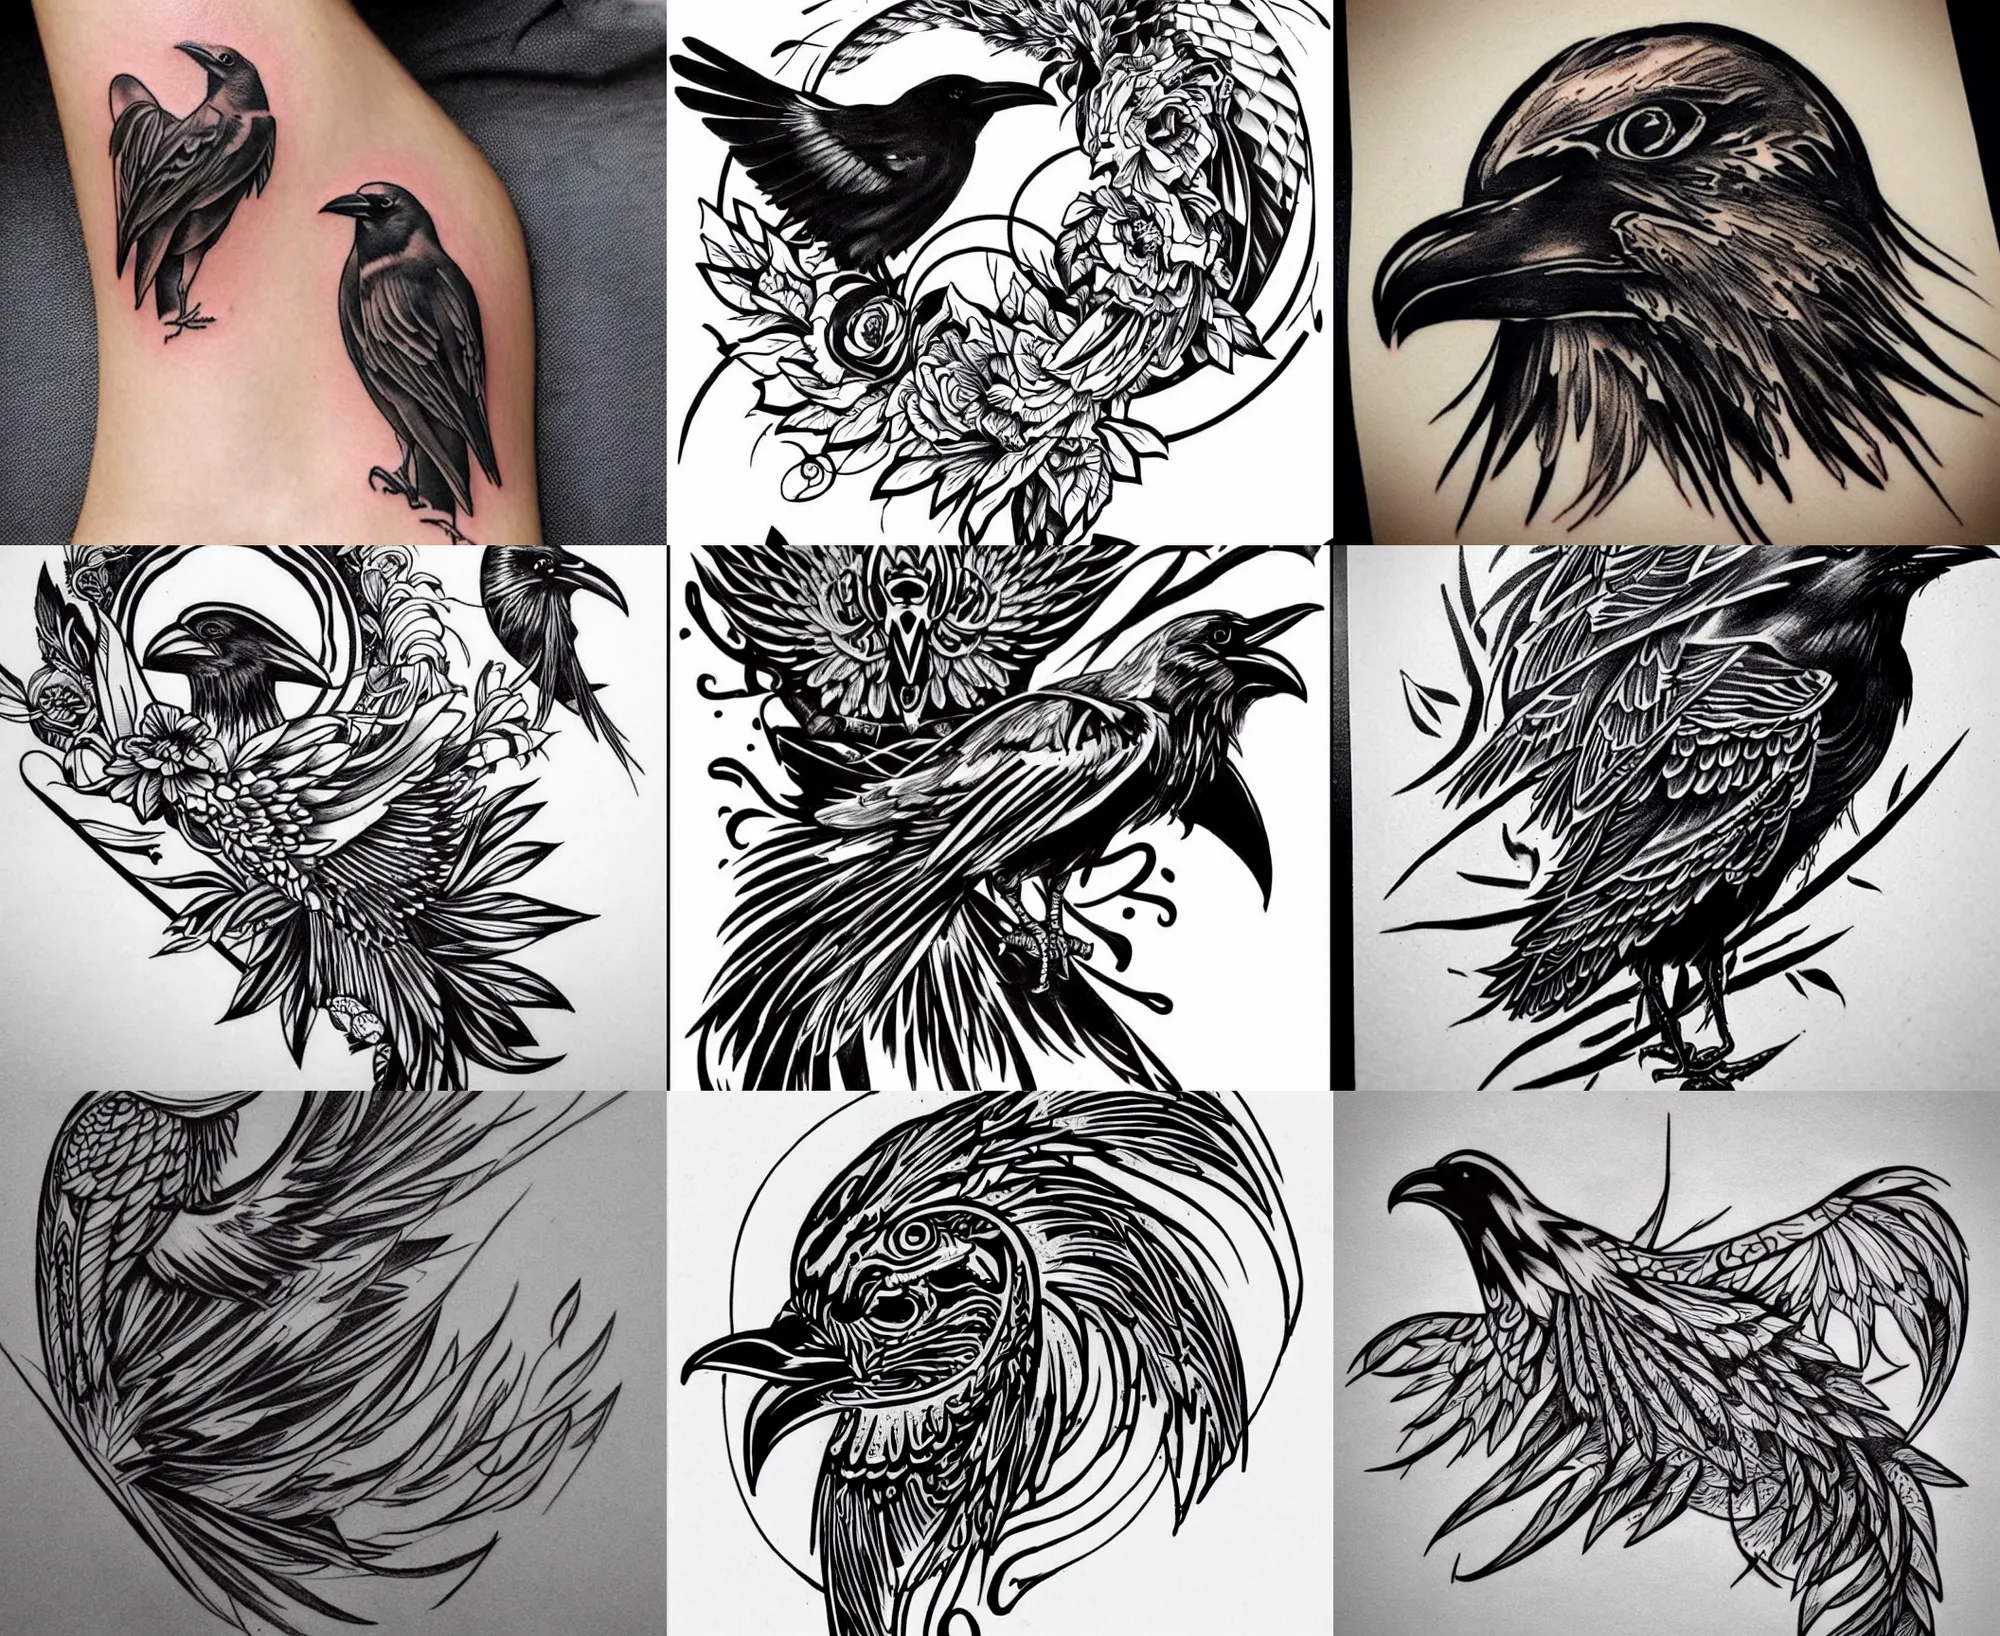 Hand drawn crow tattoo sketch Royalty Free Vector Image